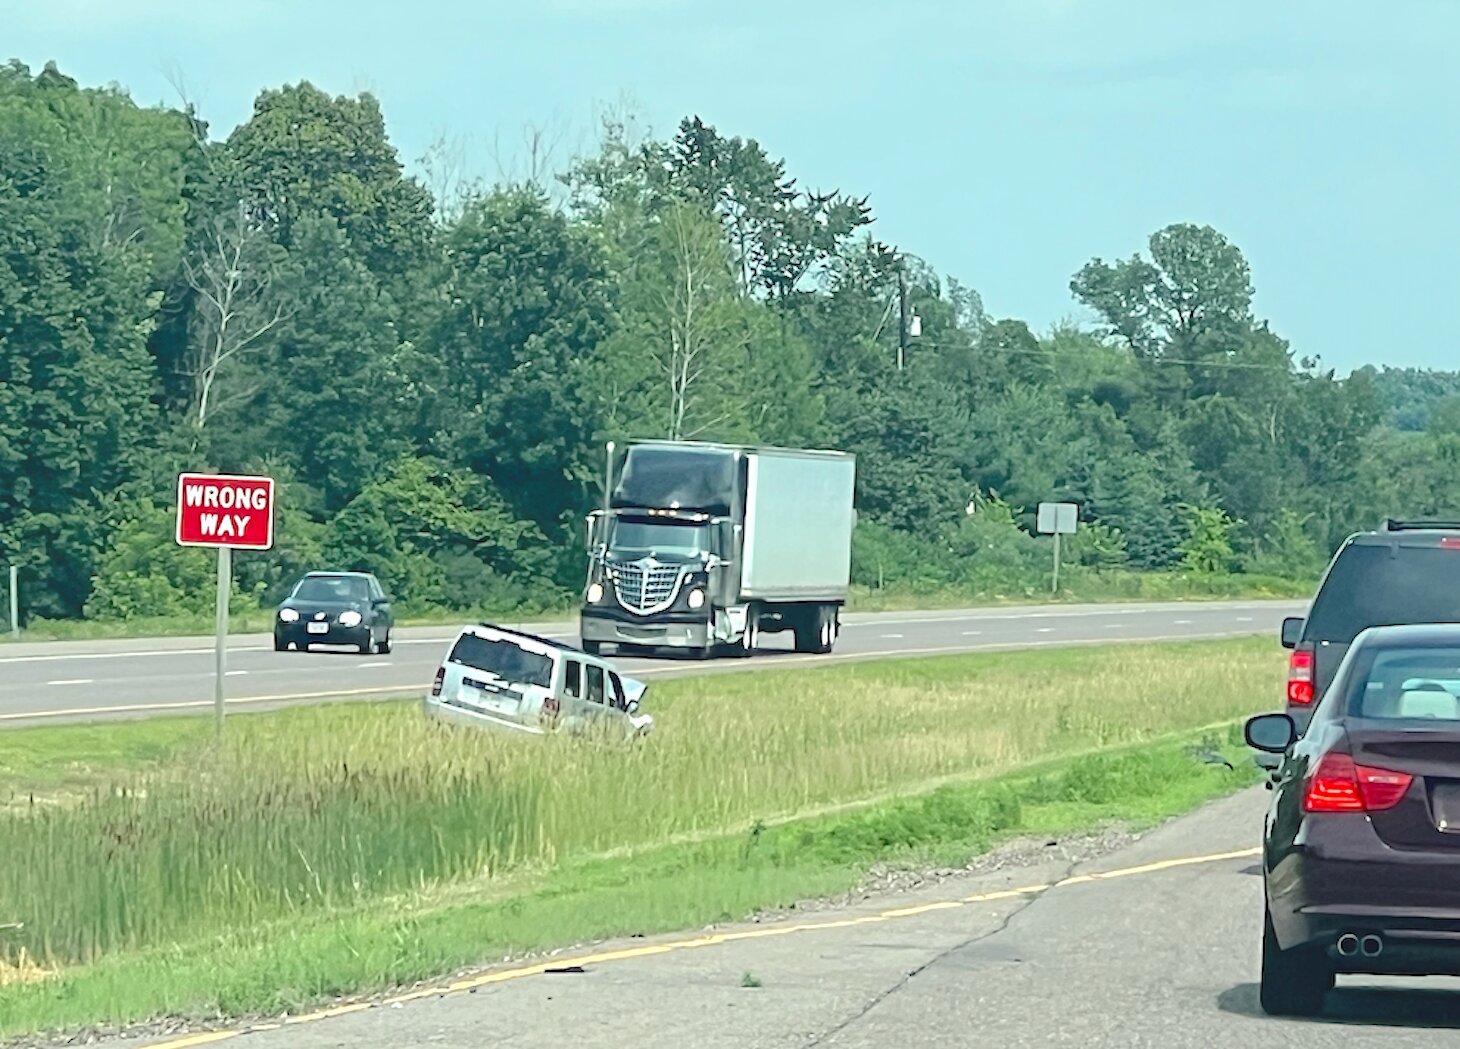 A silver SUV was towed from the scene of an accident near Boyd after it failed to keep its lane traveling eastbound and collided with a Chrysler Town and Country Wednesday. The occupants of the other vehicle were transported by EMS Ground with suspected minor injury, per the crash report.